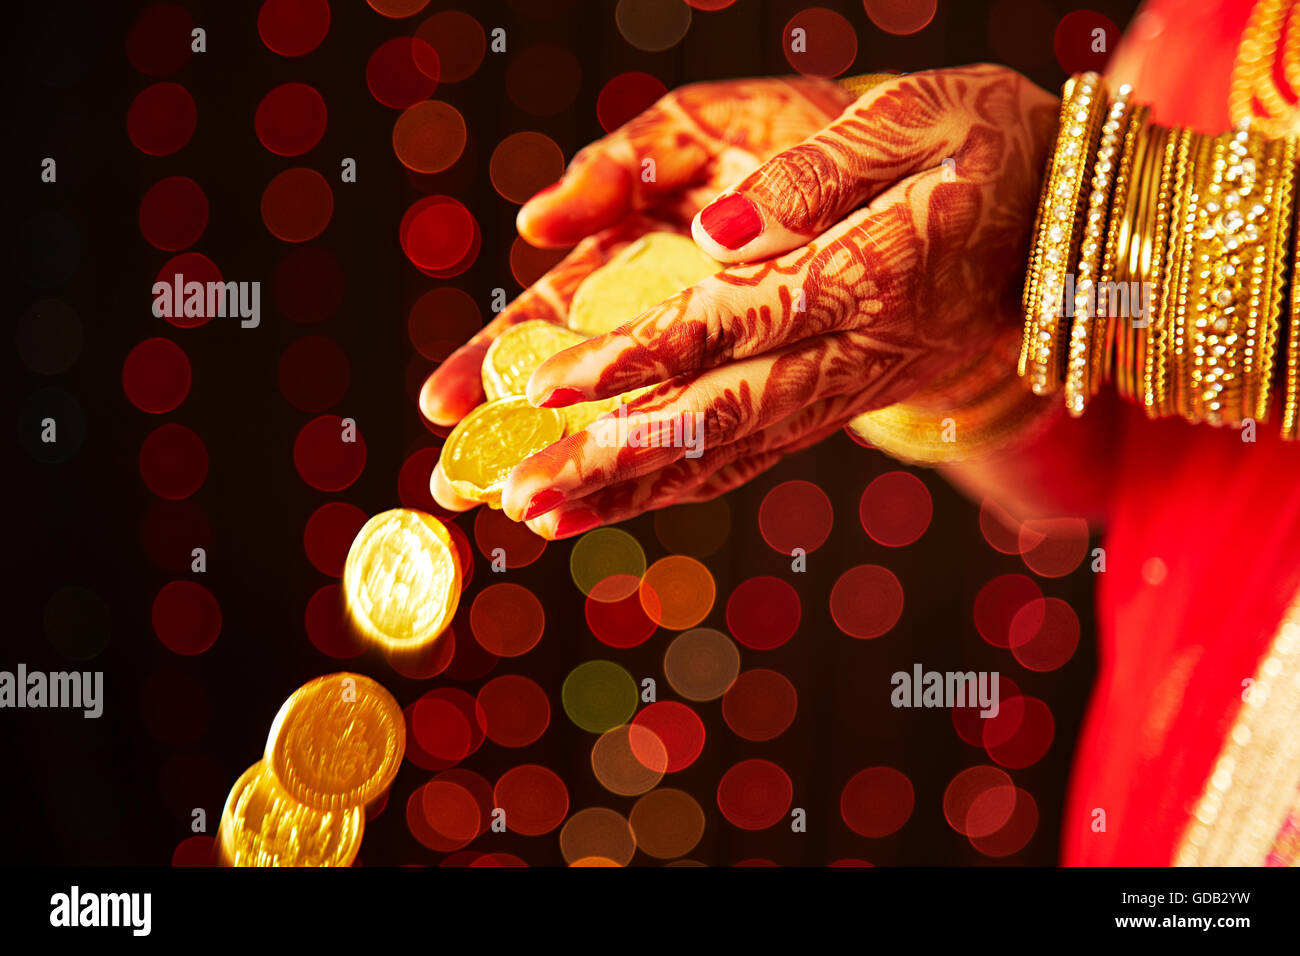 1 indian Adult Woman Bride Hands-cupped Gold Coin Pouring Stock Photo